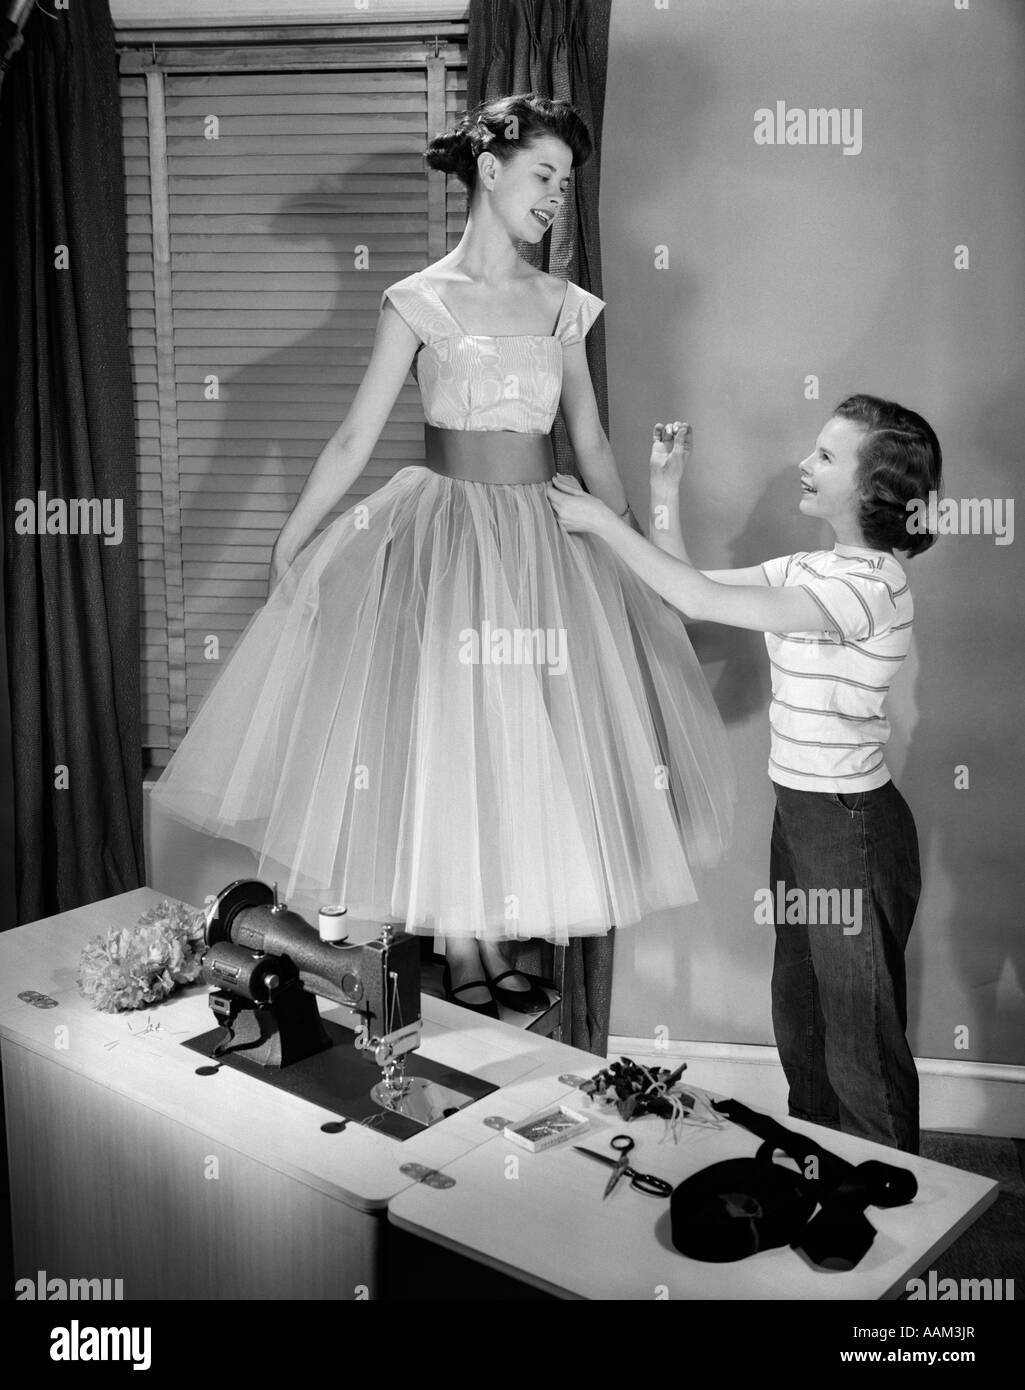 1950s TWO TEEN GIRLS WITH SEWING MACHINE ONE GIRL MODELING FANCY PROM DRESS OTHER GIRL ADJUSTING WAISTBAND Stock Photo